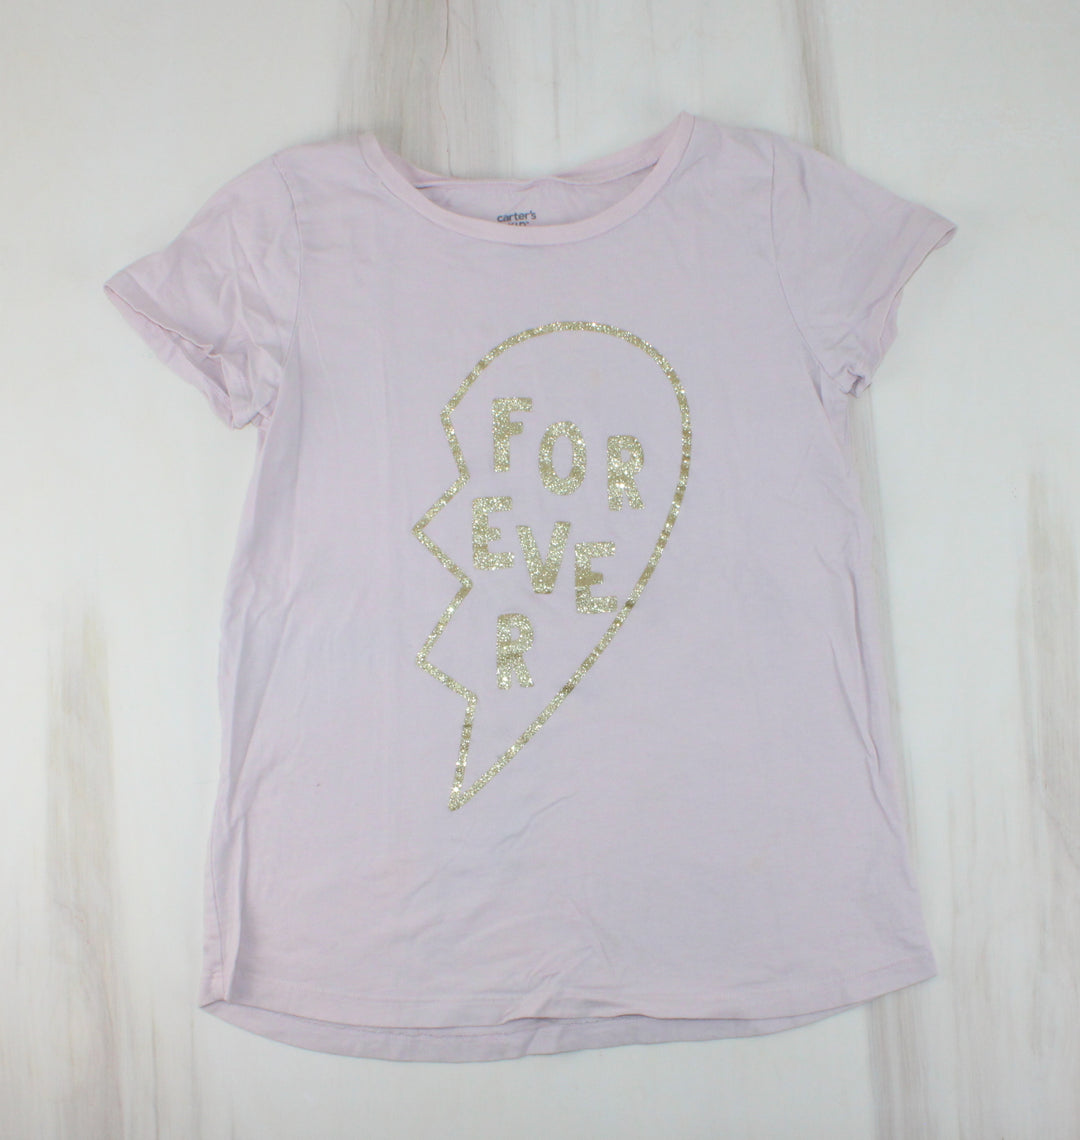 CARTERS "FOREVER" PALE PINK TSHIRT 14Y VGUC